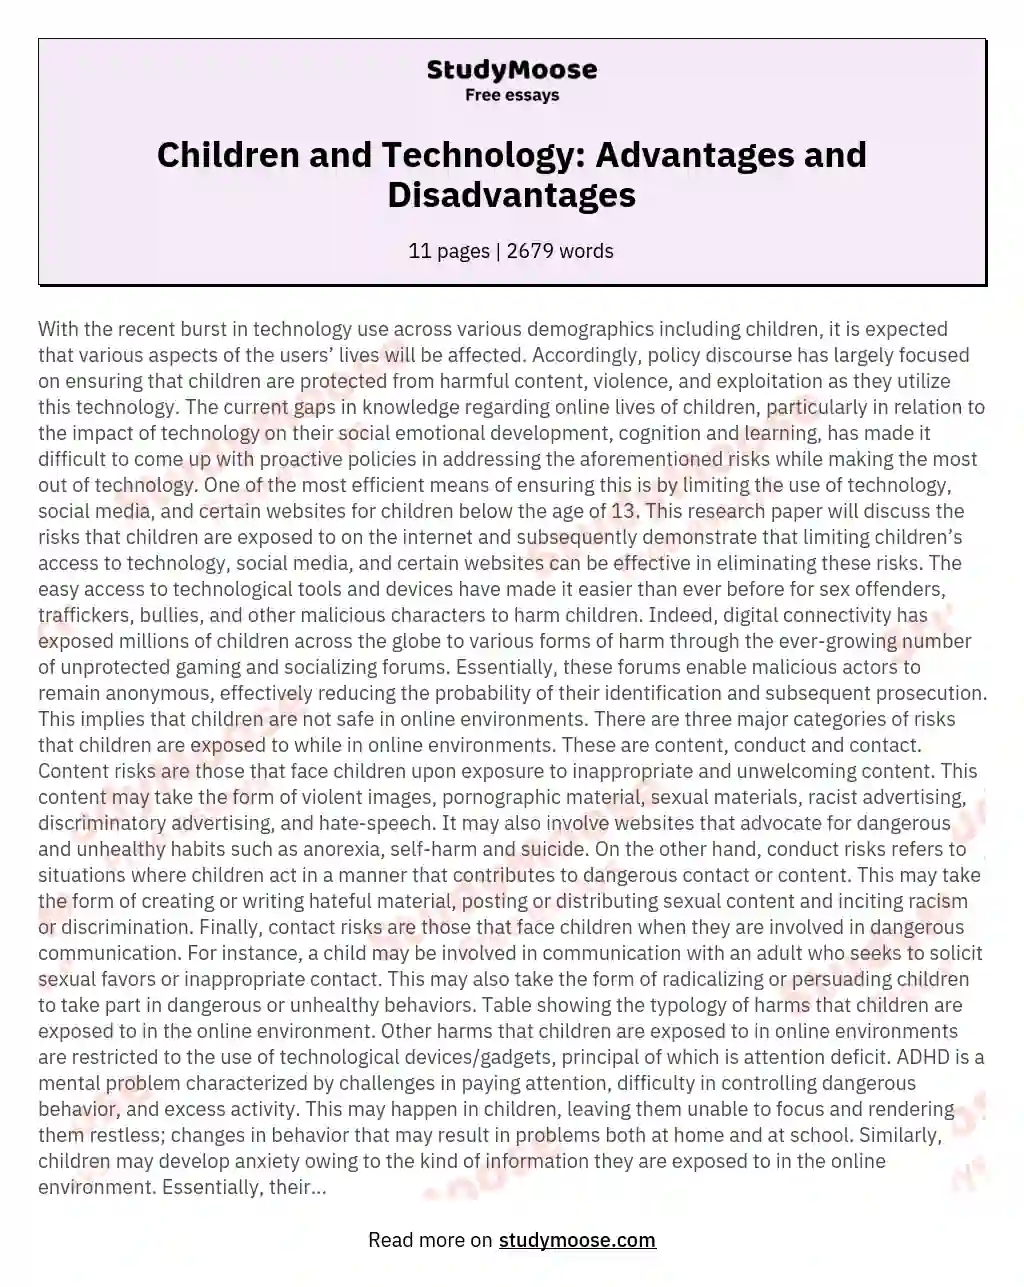 Children and Technology: Advantages and Disadvantages essay